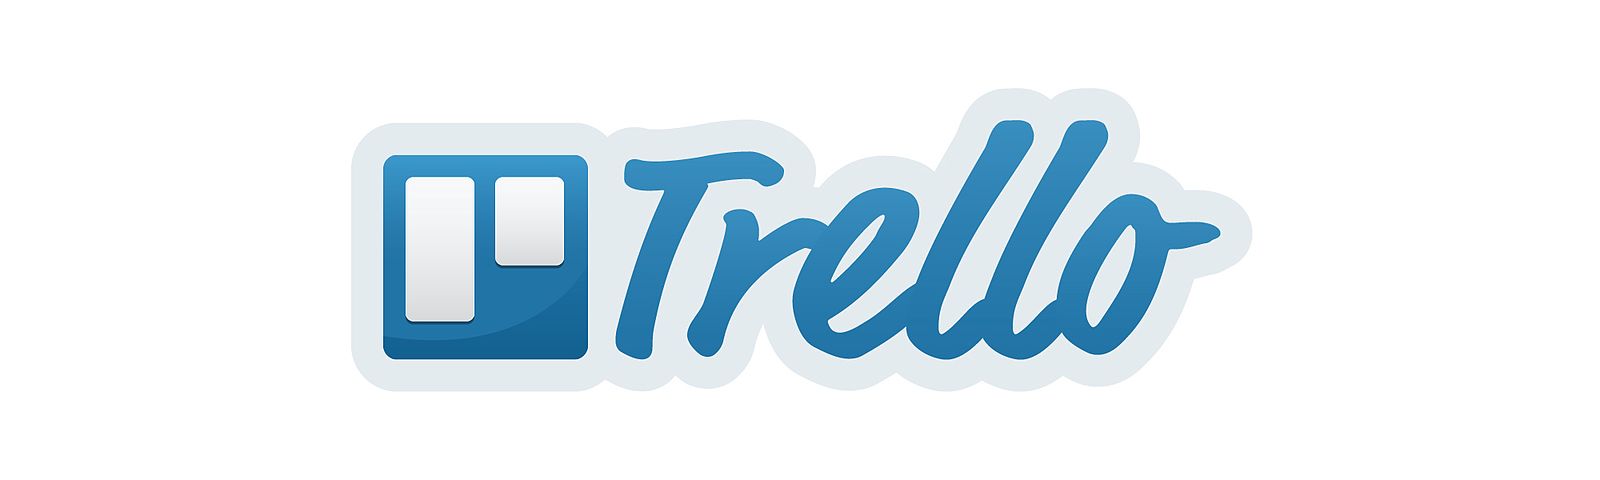 Difference Between Asana and Trello